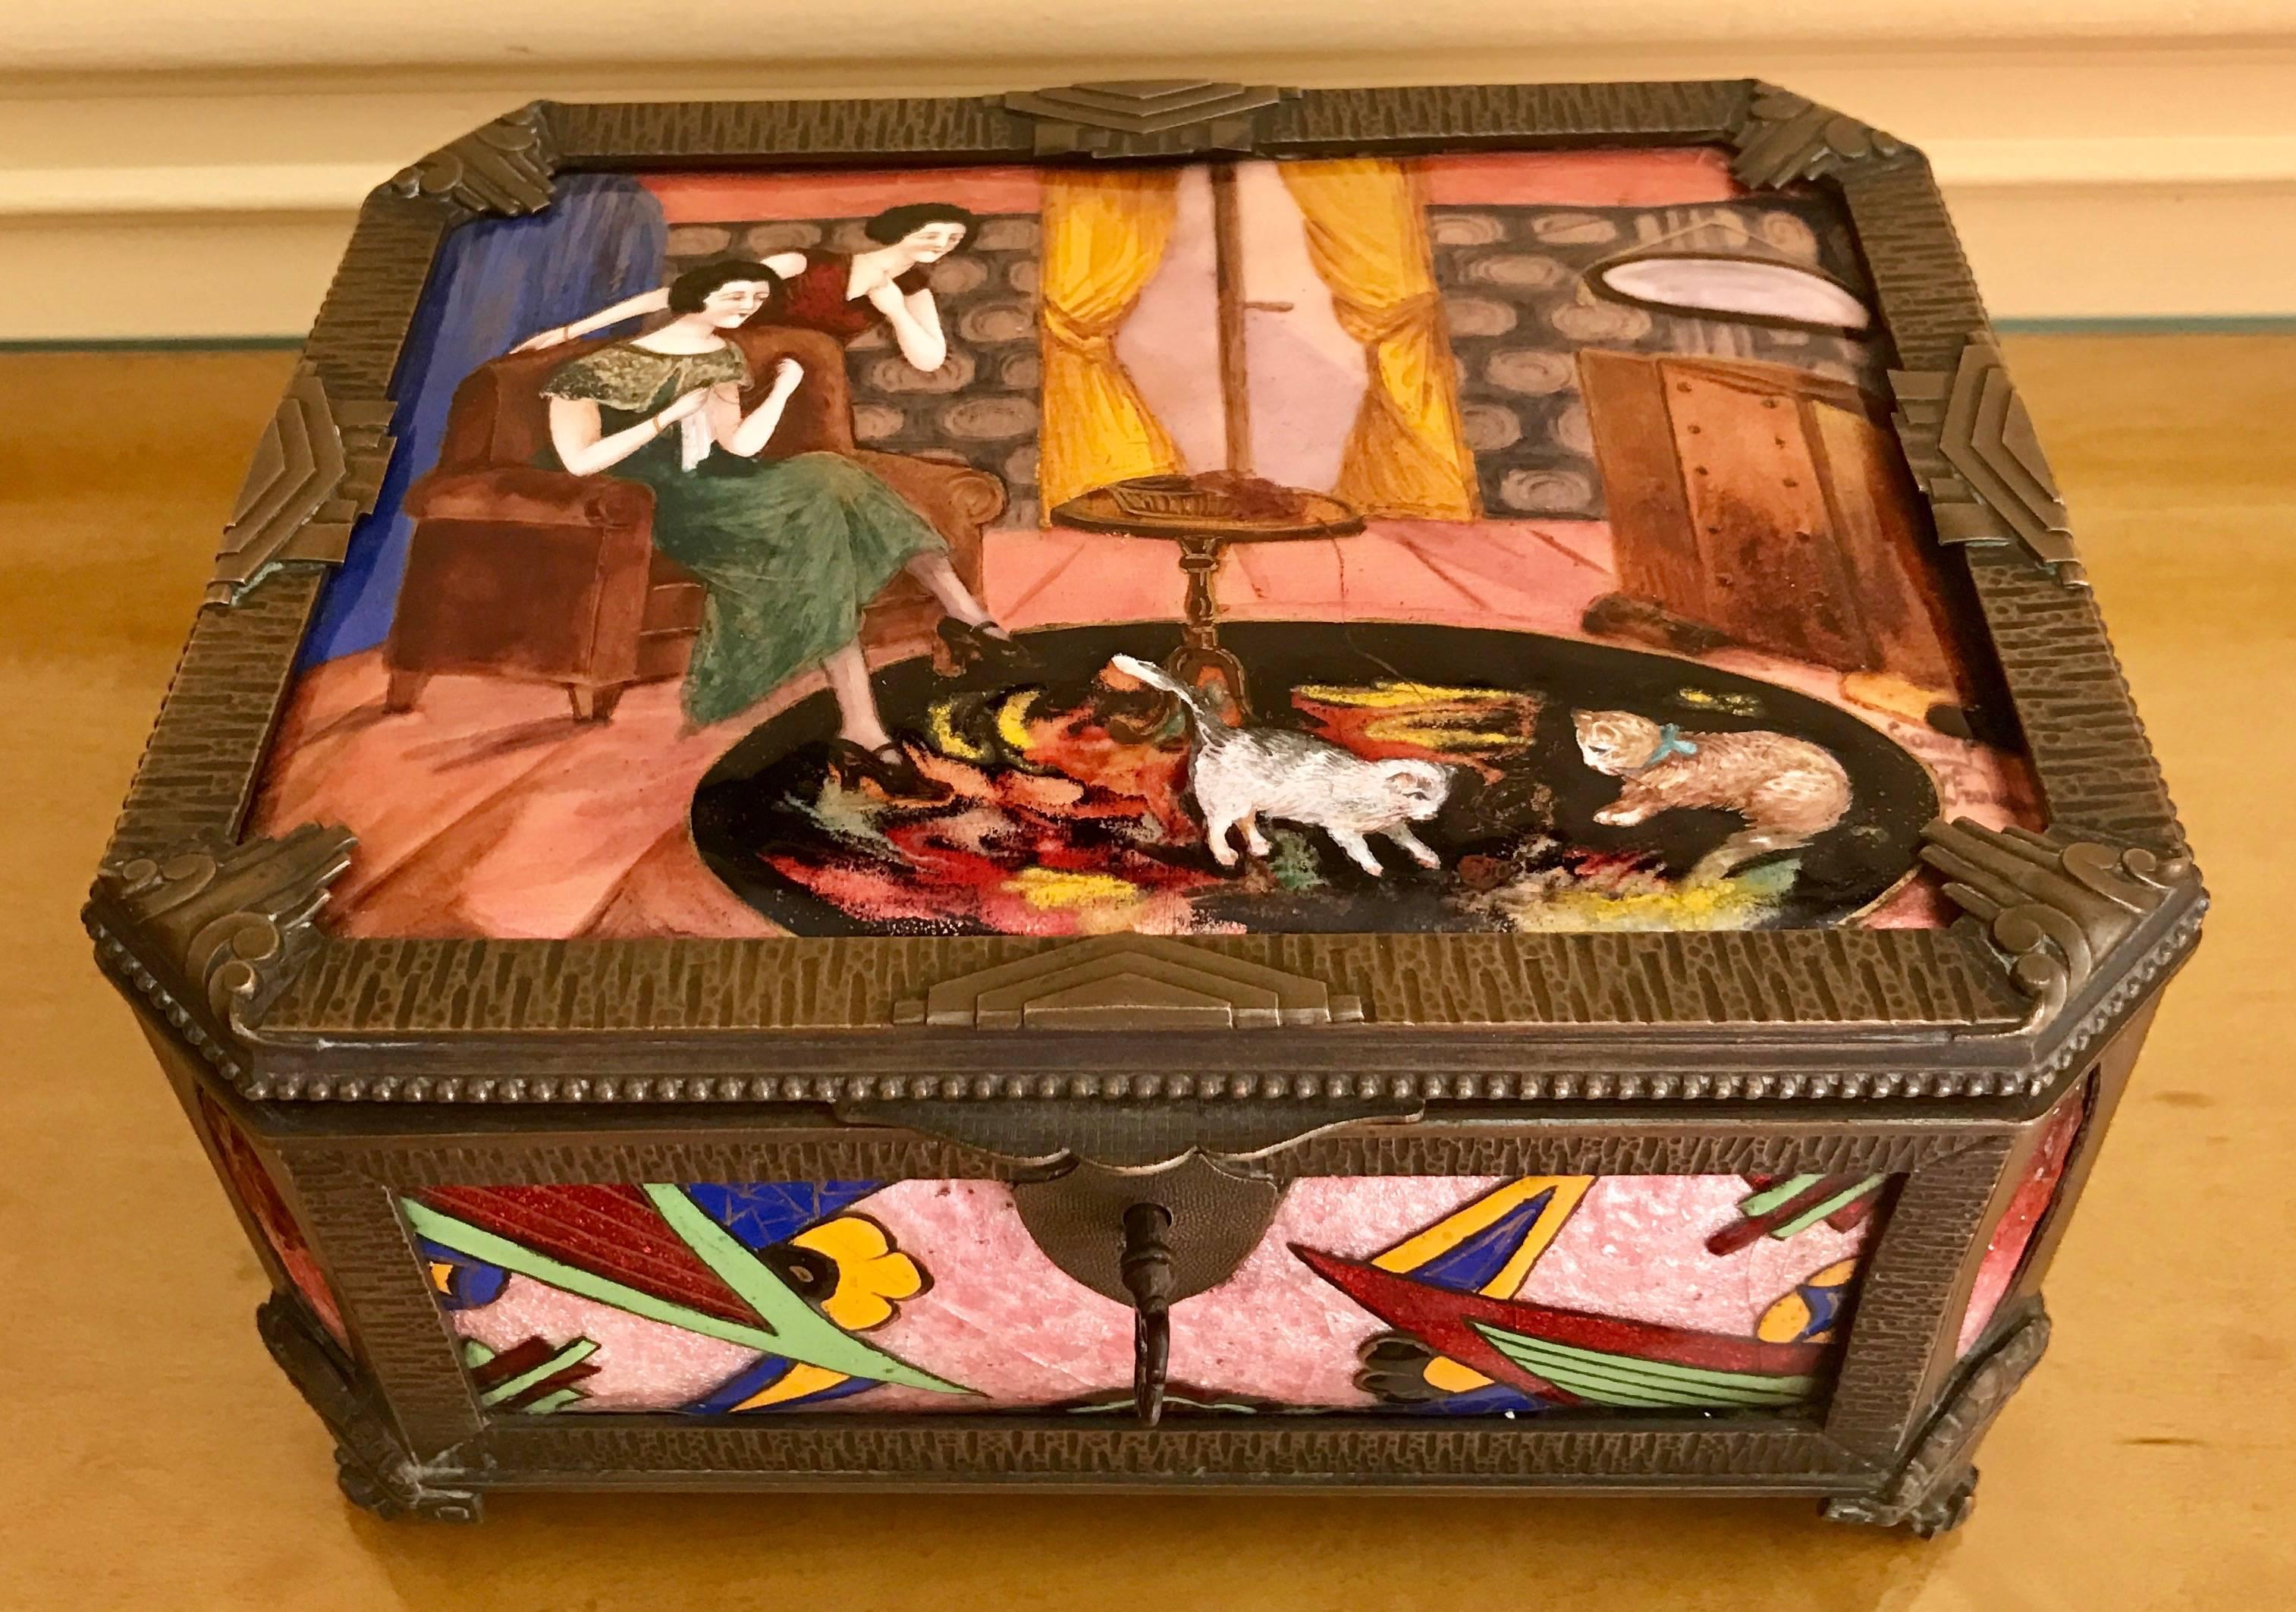 A large and impressive octagon shaped enamel dresser box, French, early 20th century and rendered in vibrant colors using five hand-painted and slightly convex porcelain panels. The custom hand-tooled bronze/brass frame with stylized chevrons and